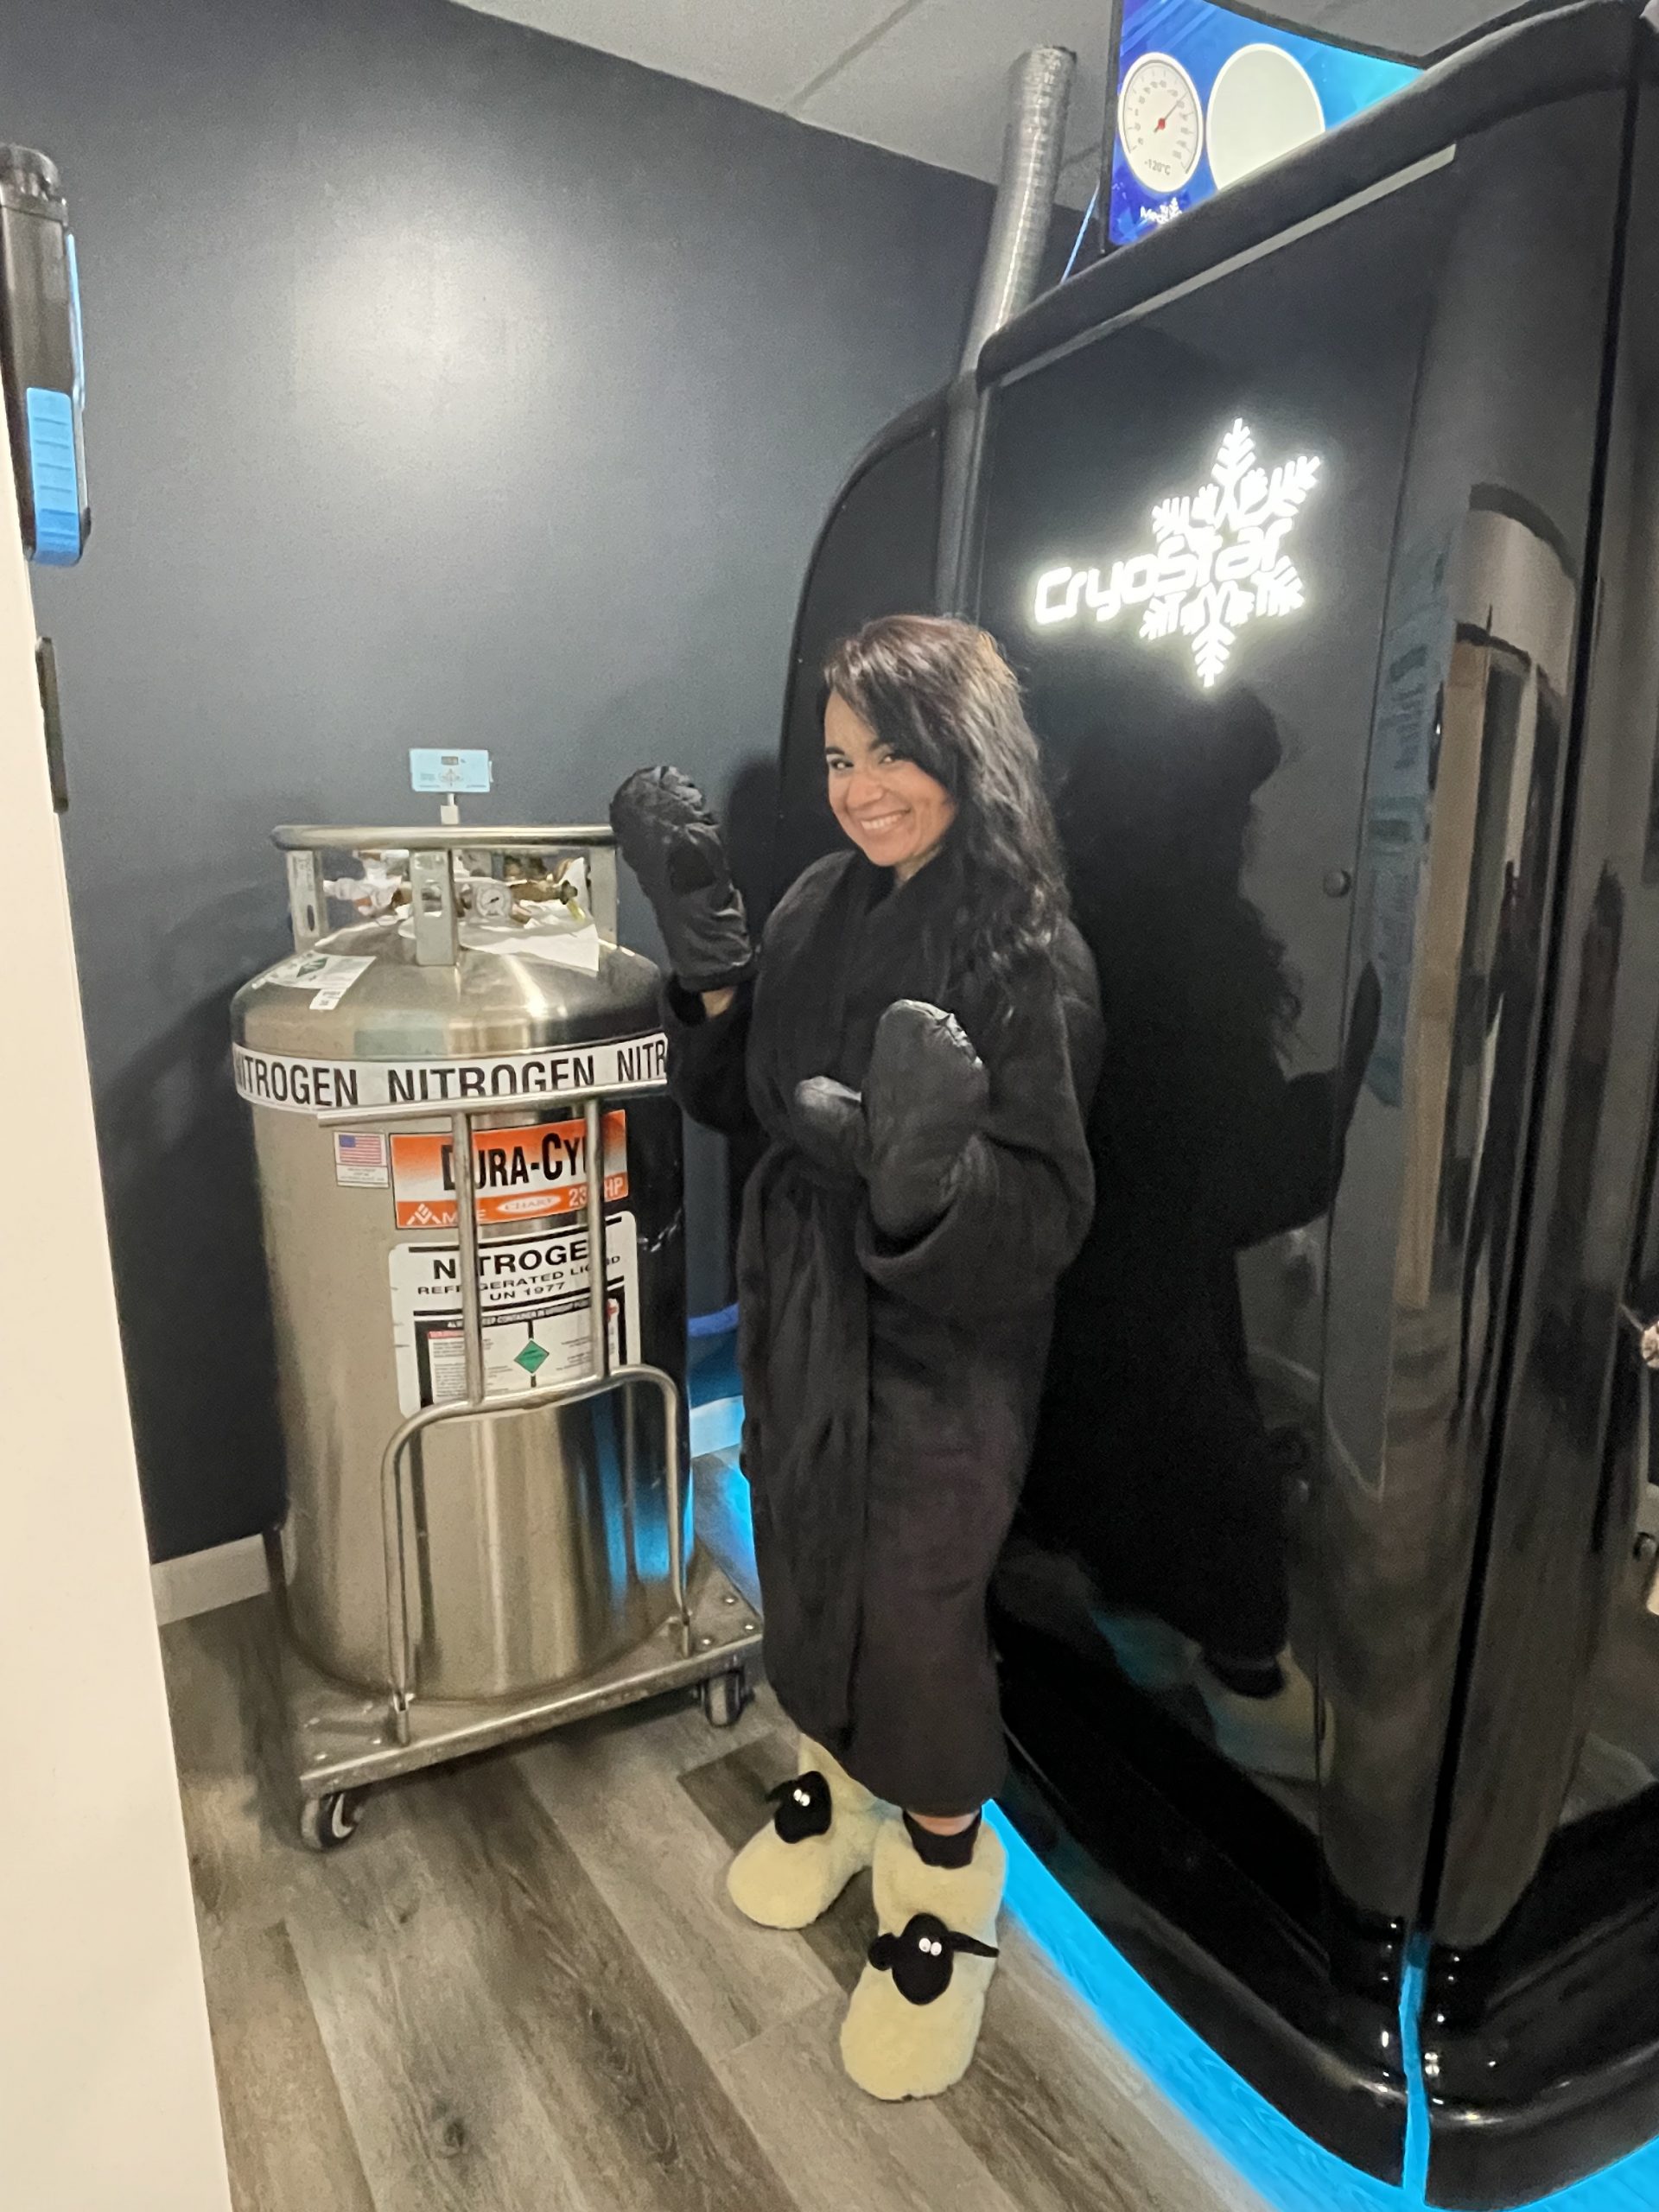 Cryo Republic Announces May 28 Grand Opening of San Diego San Diego Cryotherapy and Aesthetics Spa Facility